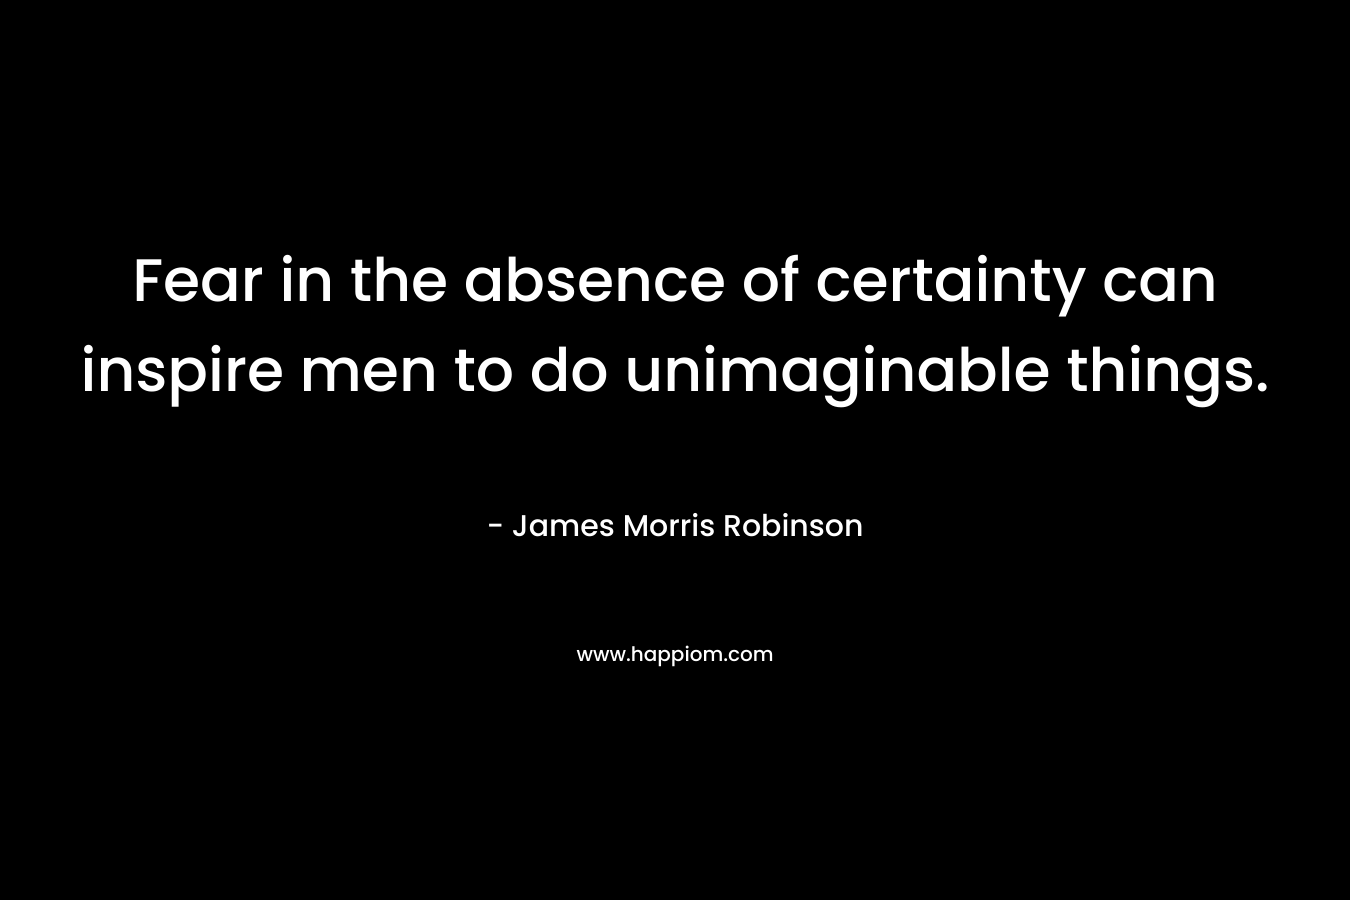 Fear in the absence of certainty can inspire men to do unimaginable things.